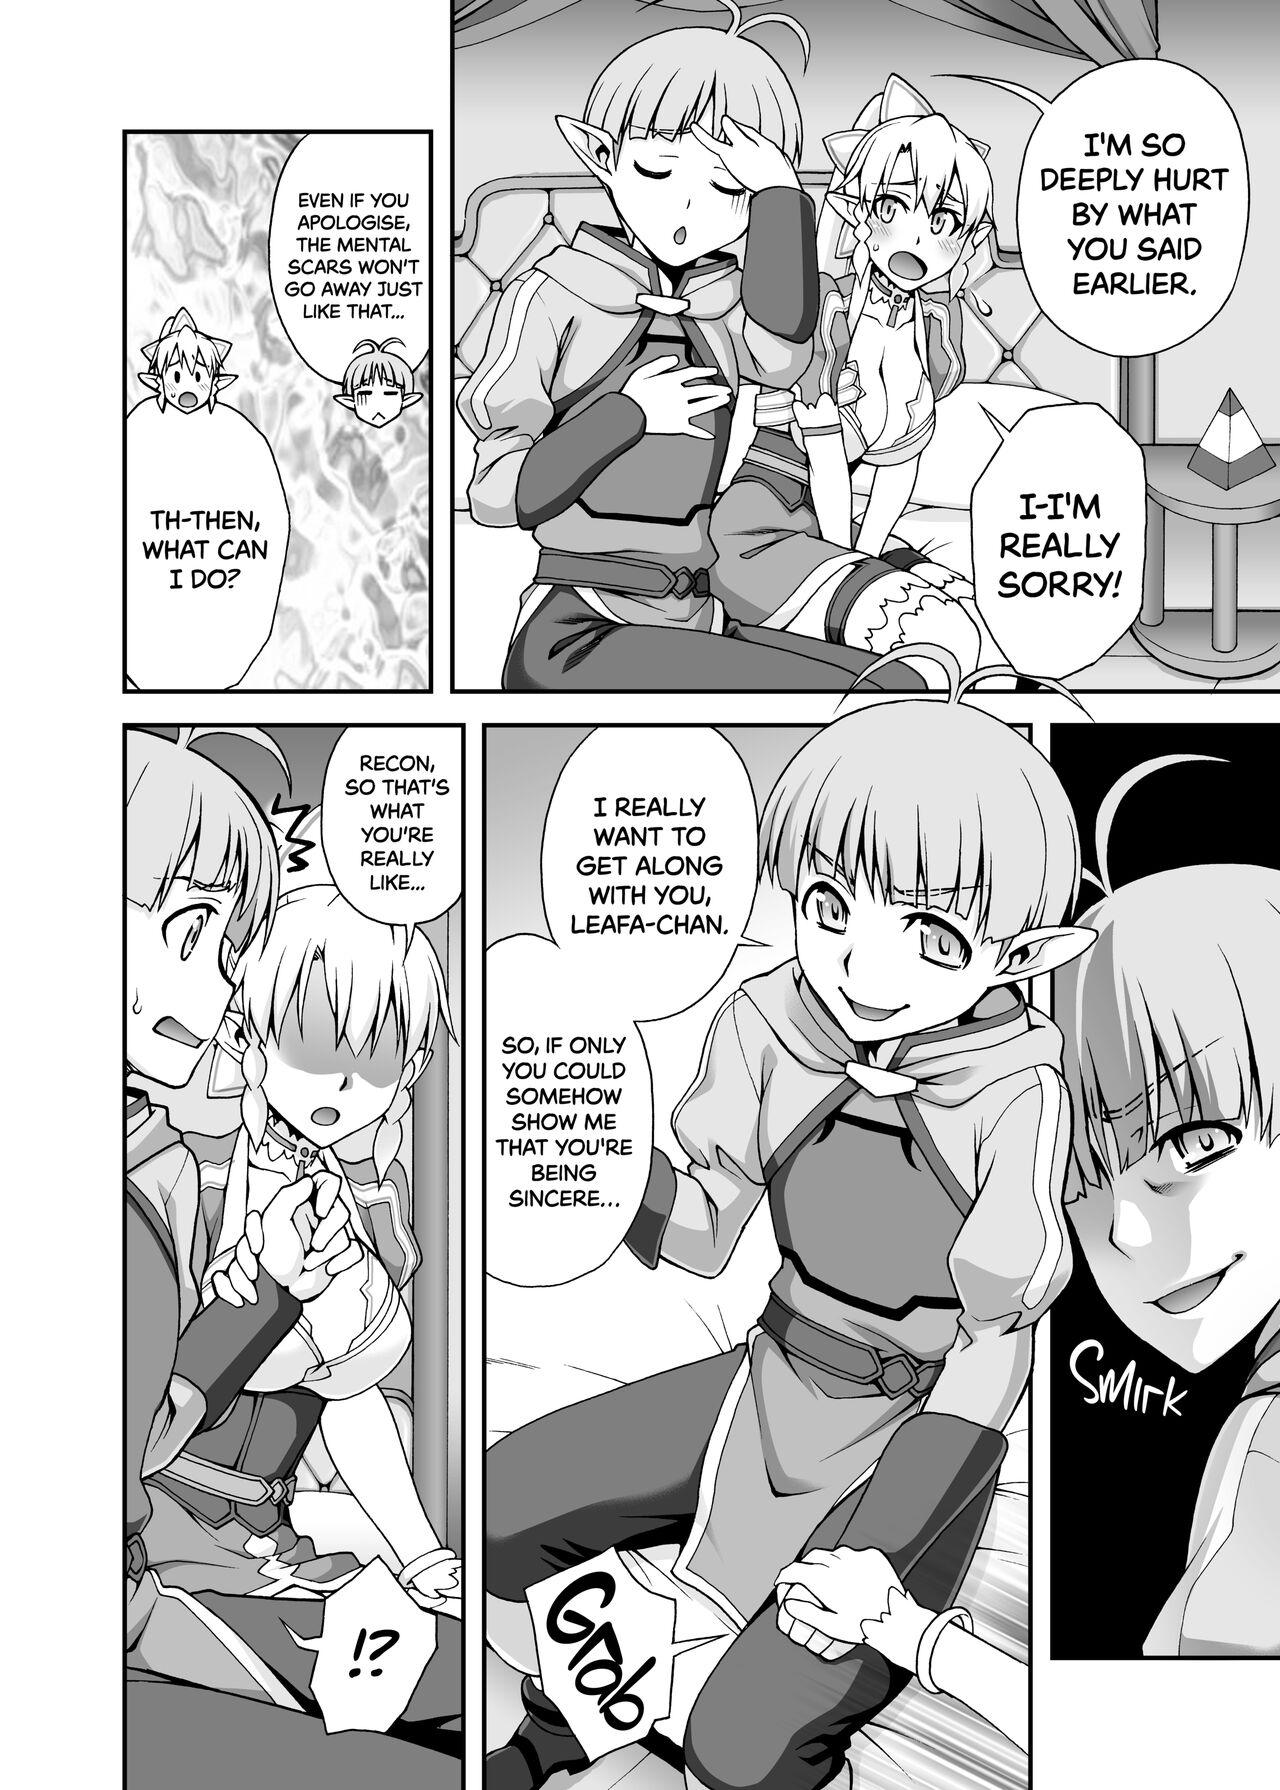 Throatfuck Delphinium Madonna 2 - Sword art online Family Roleplay - Page 9